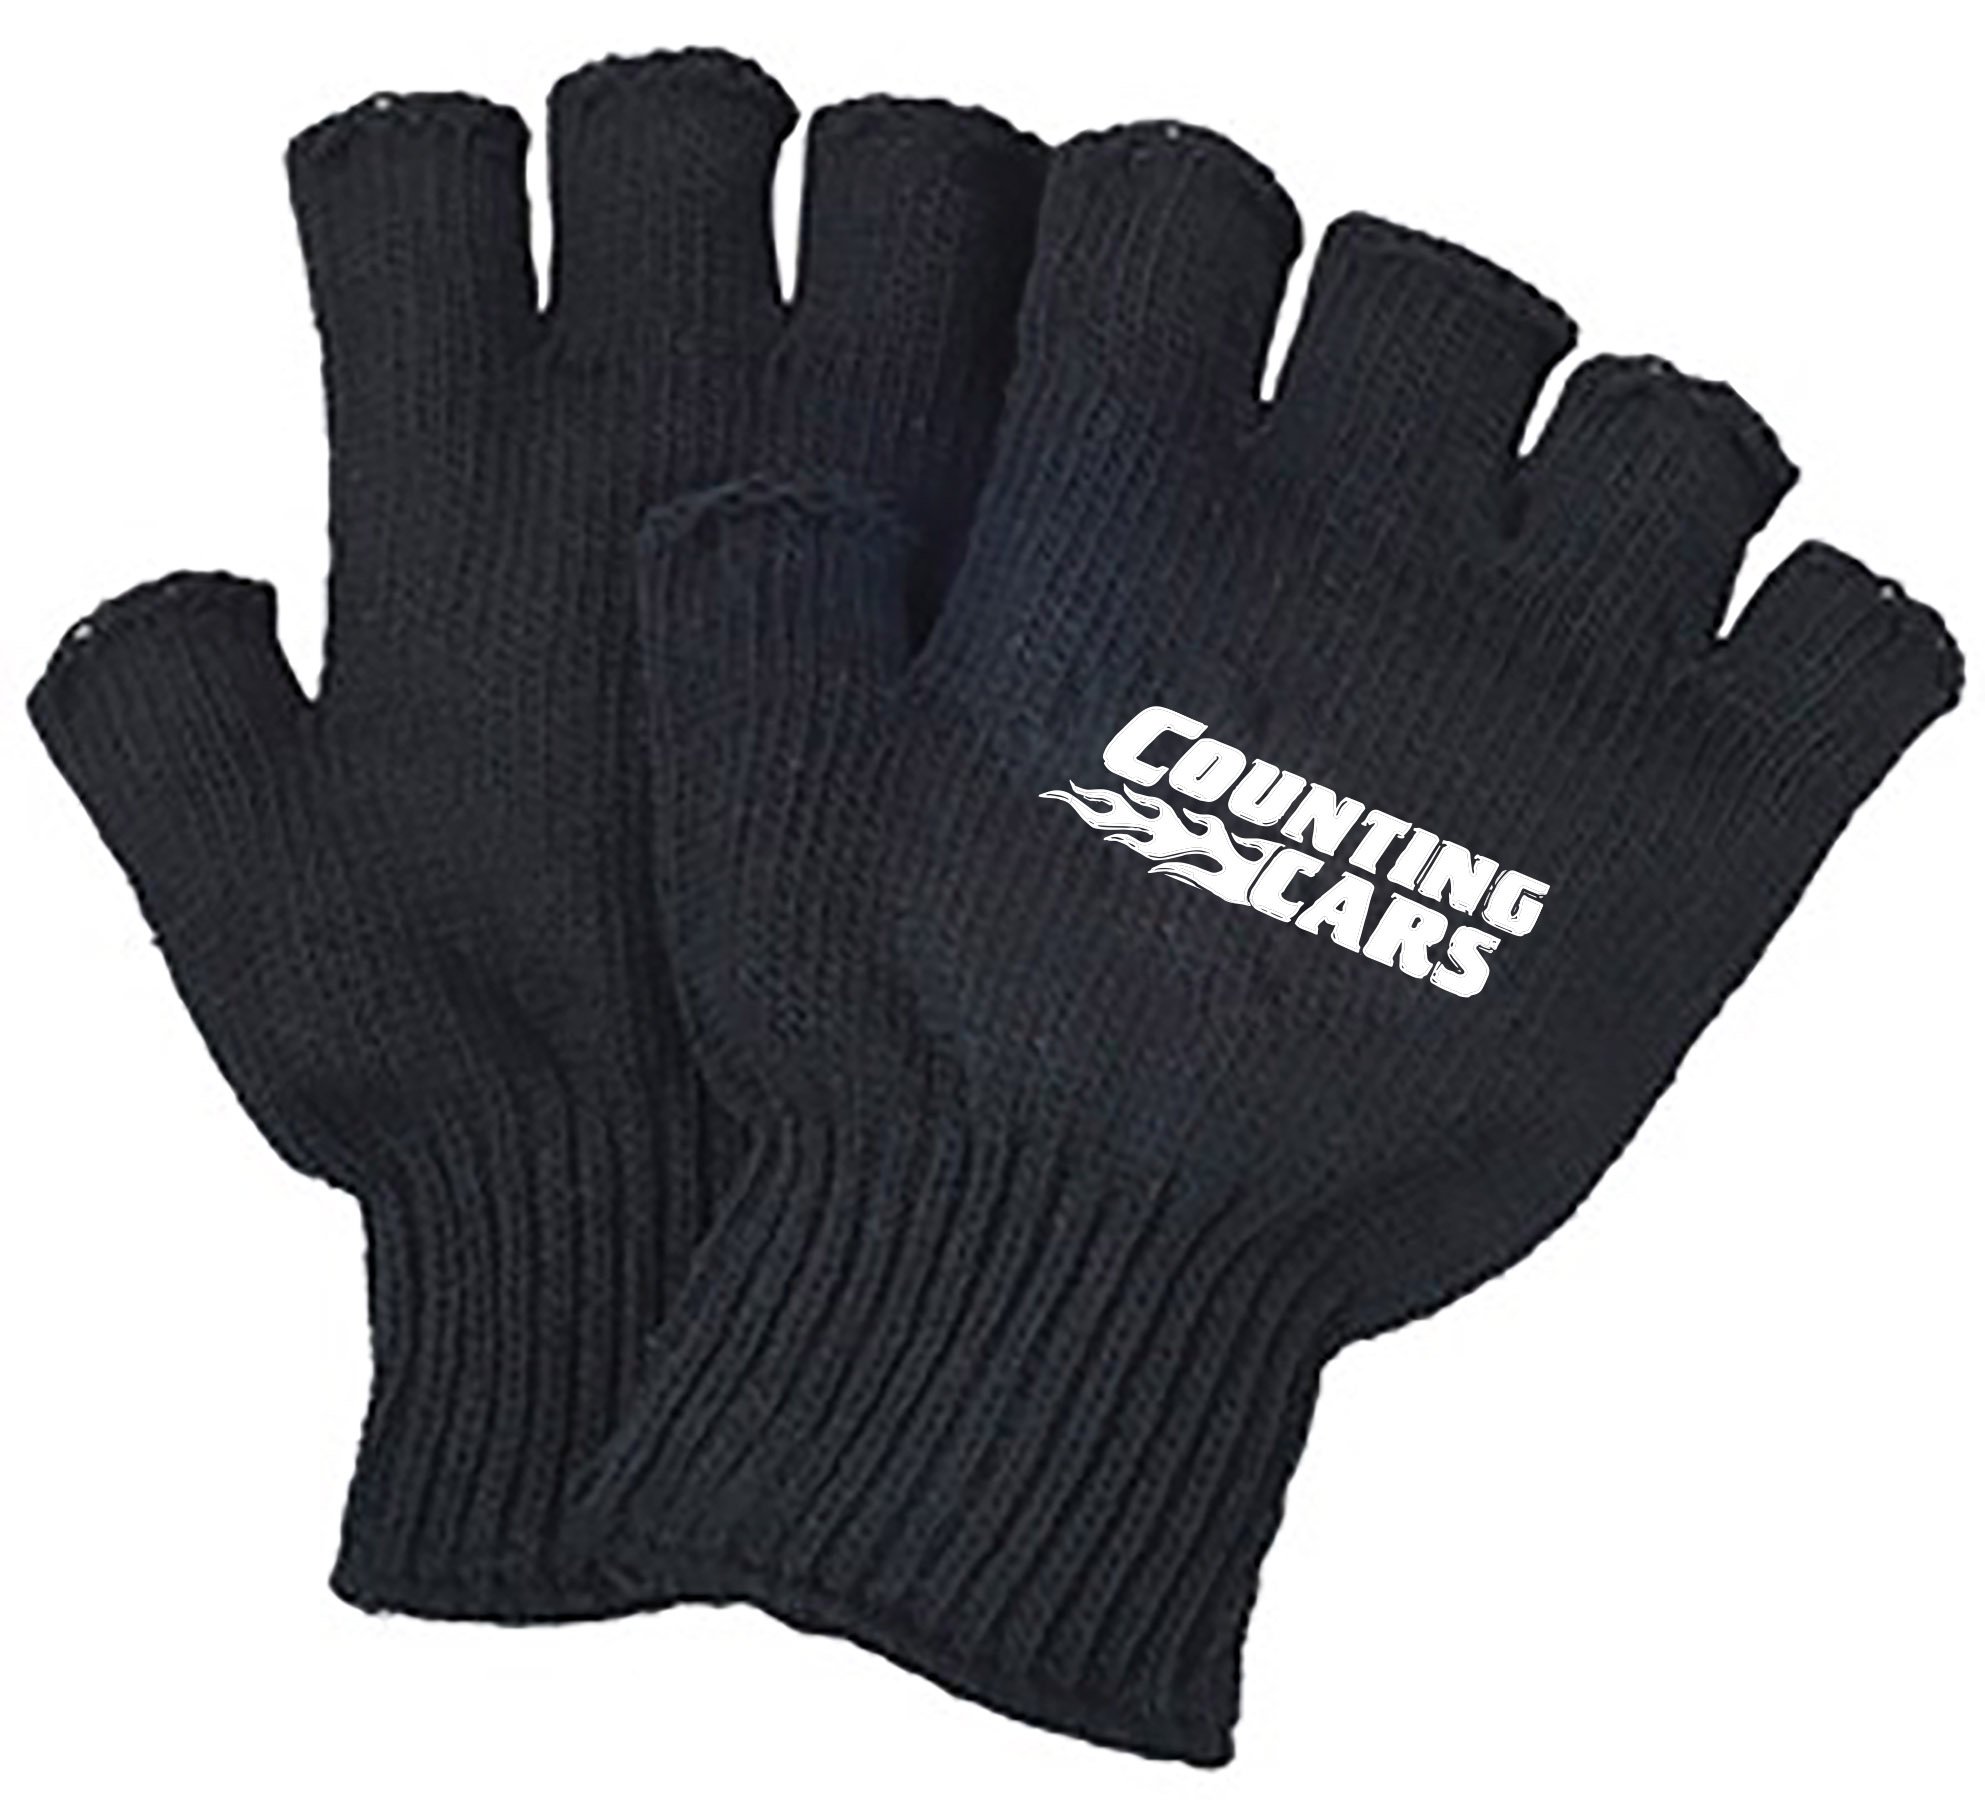 Counting Cars_blk glove.jpg